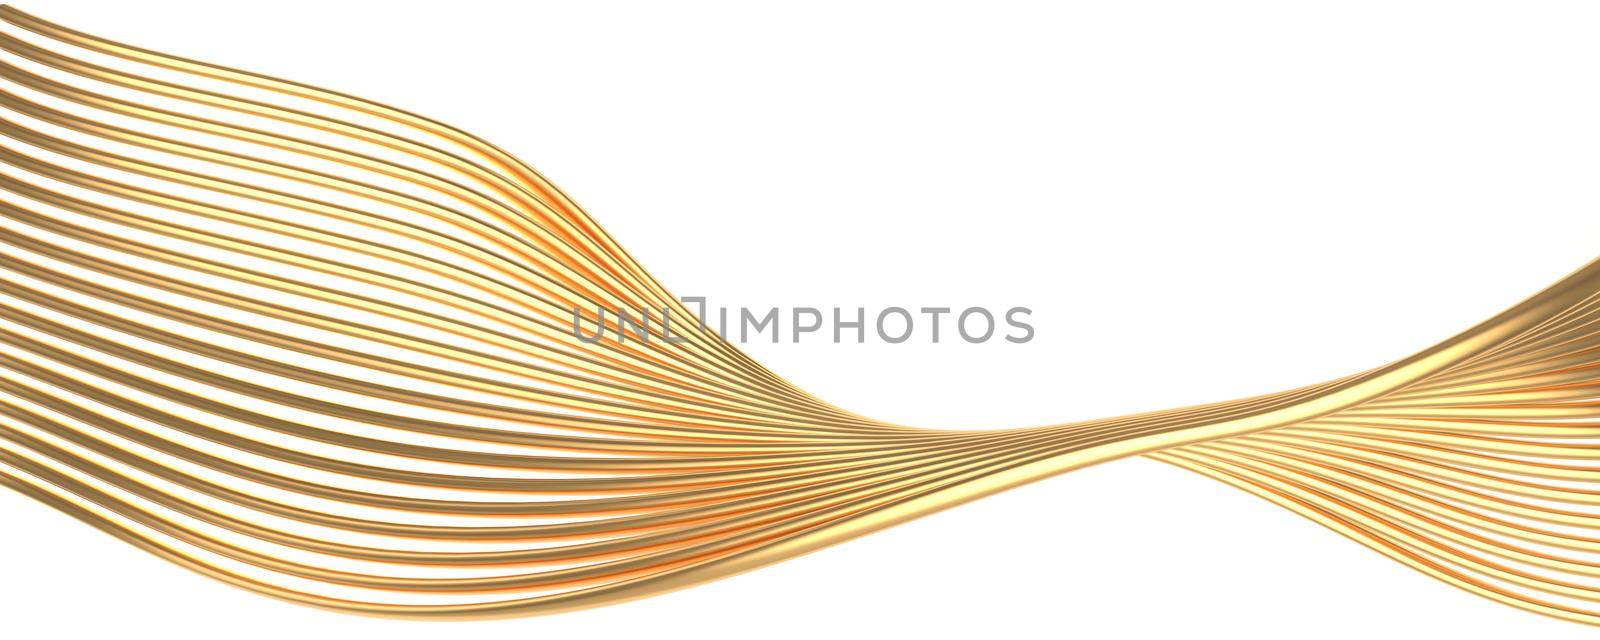 Golden wires abstract wave 3D rendering illustration isolated on white background